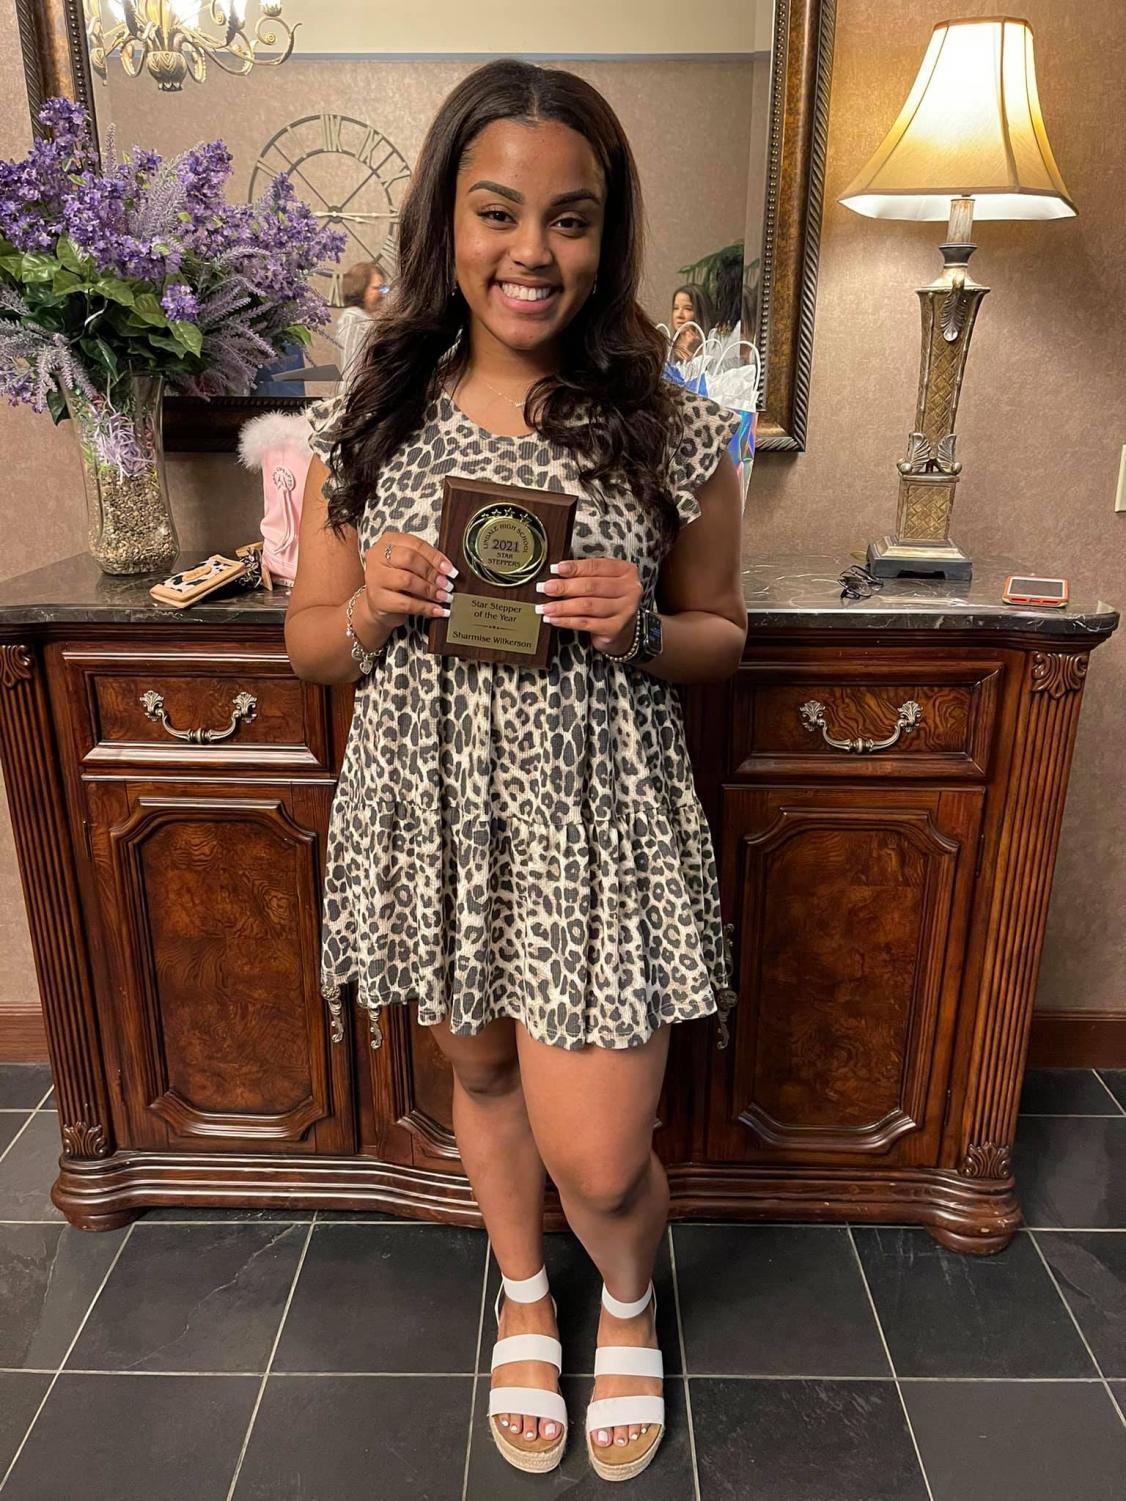 The entire Star Steppers team voted senior Sharmise Wilkerson as their Star Stepper of the Year. 
“Receiving Star Stepper of the Year was truly honorable for me,” Wilkerson said. “I loved every moment I had on the team and would re-do it all over again if I could. I’m very blessed to have been selected.” 
Photo by Xavier Wilkerson